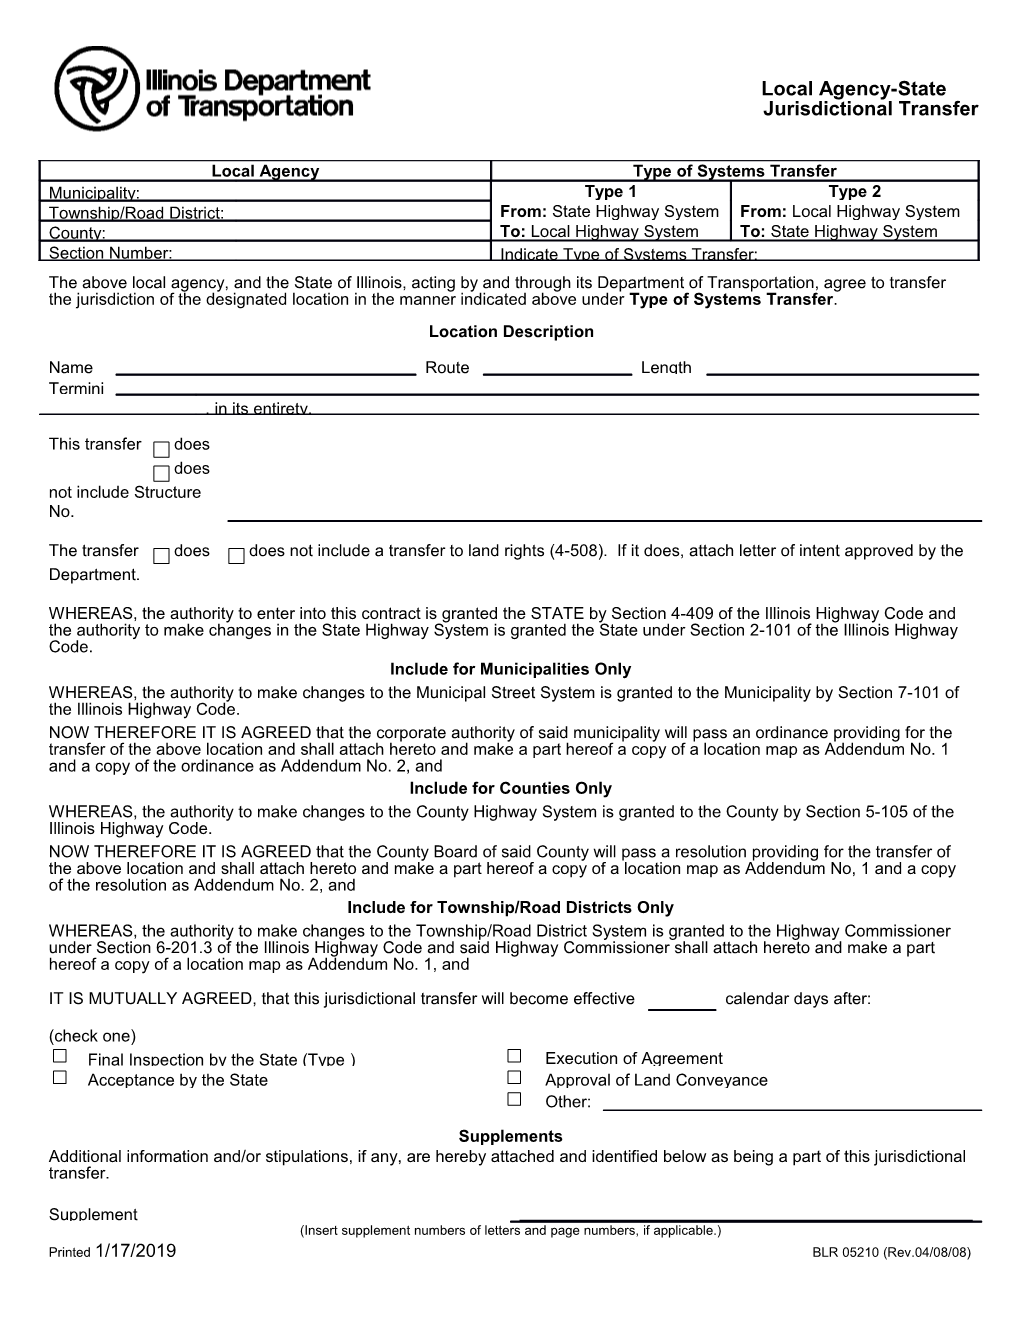 Local Agency-State Jurisdictional Transfer